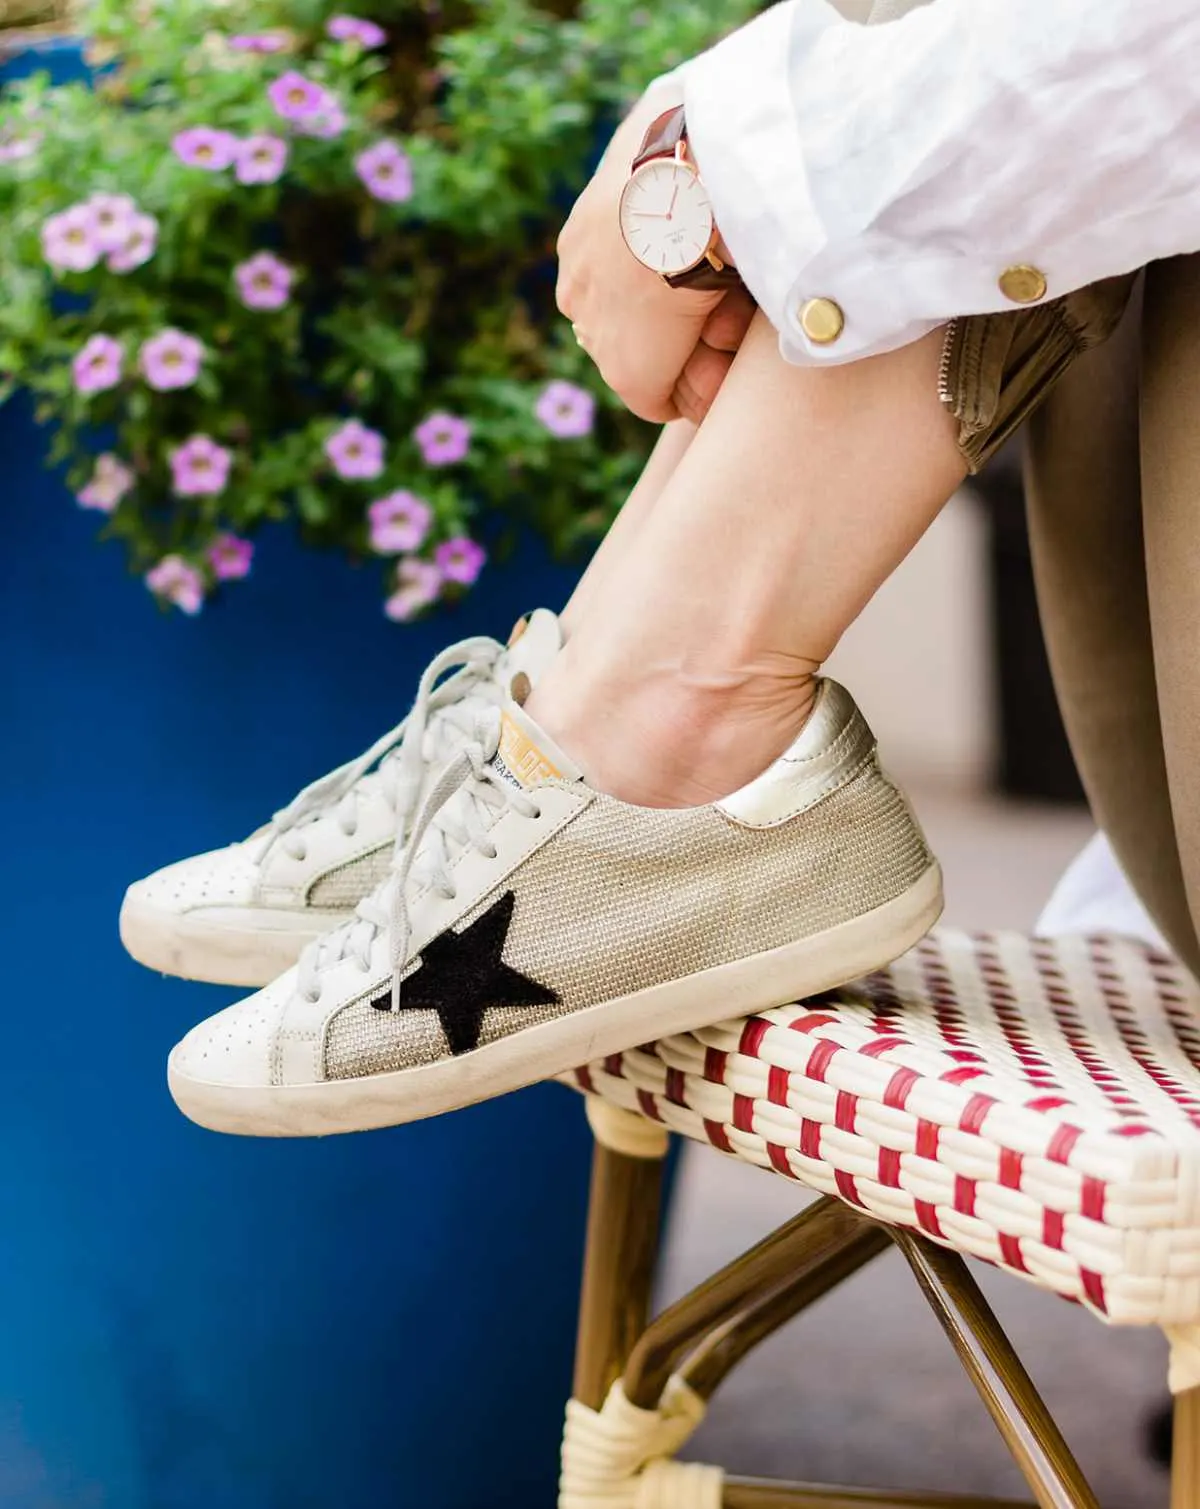 Close up of woman's feet wearing off-white golden goose star sneakers on a woven chair with purple flowers in the background.